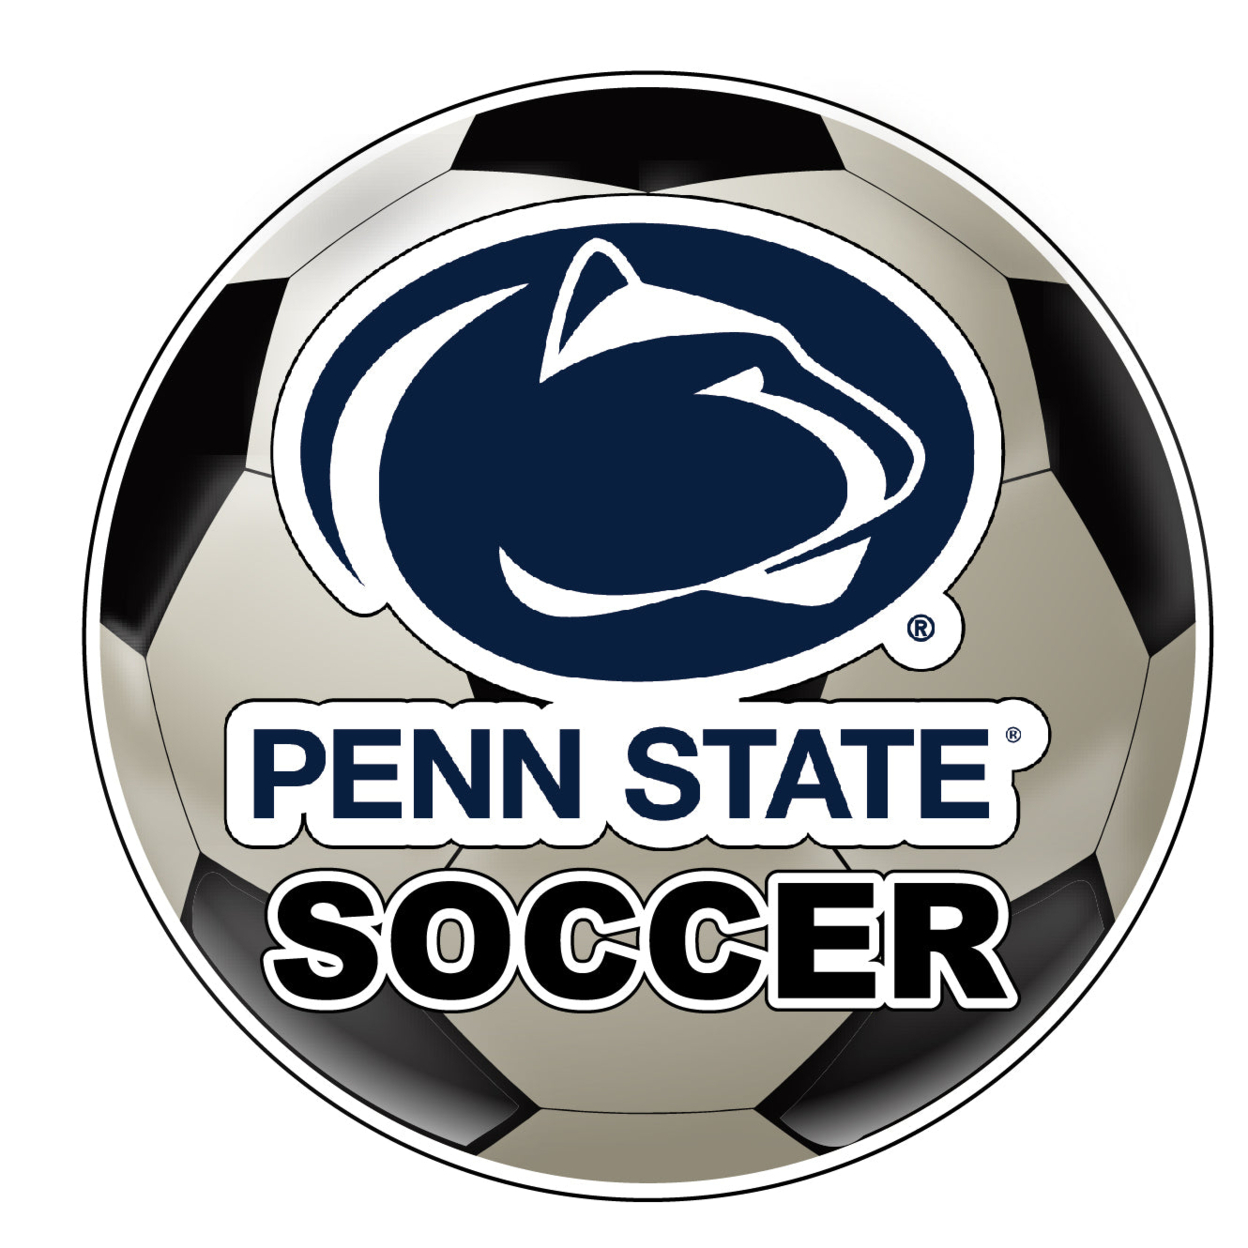 Penn State Nittany Lions 4-Inch Round Soccer Ball Vinyl Decal Sticker